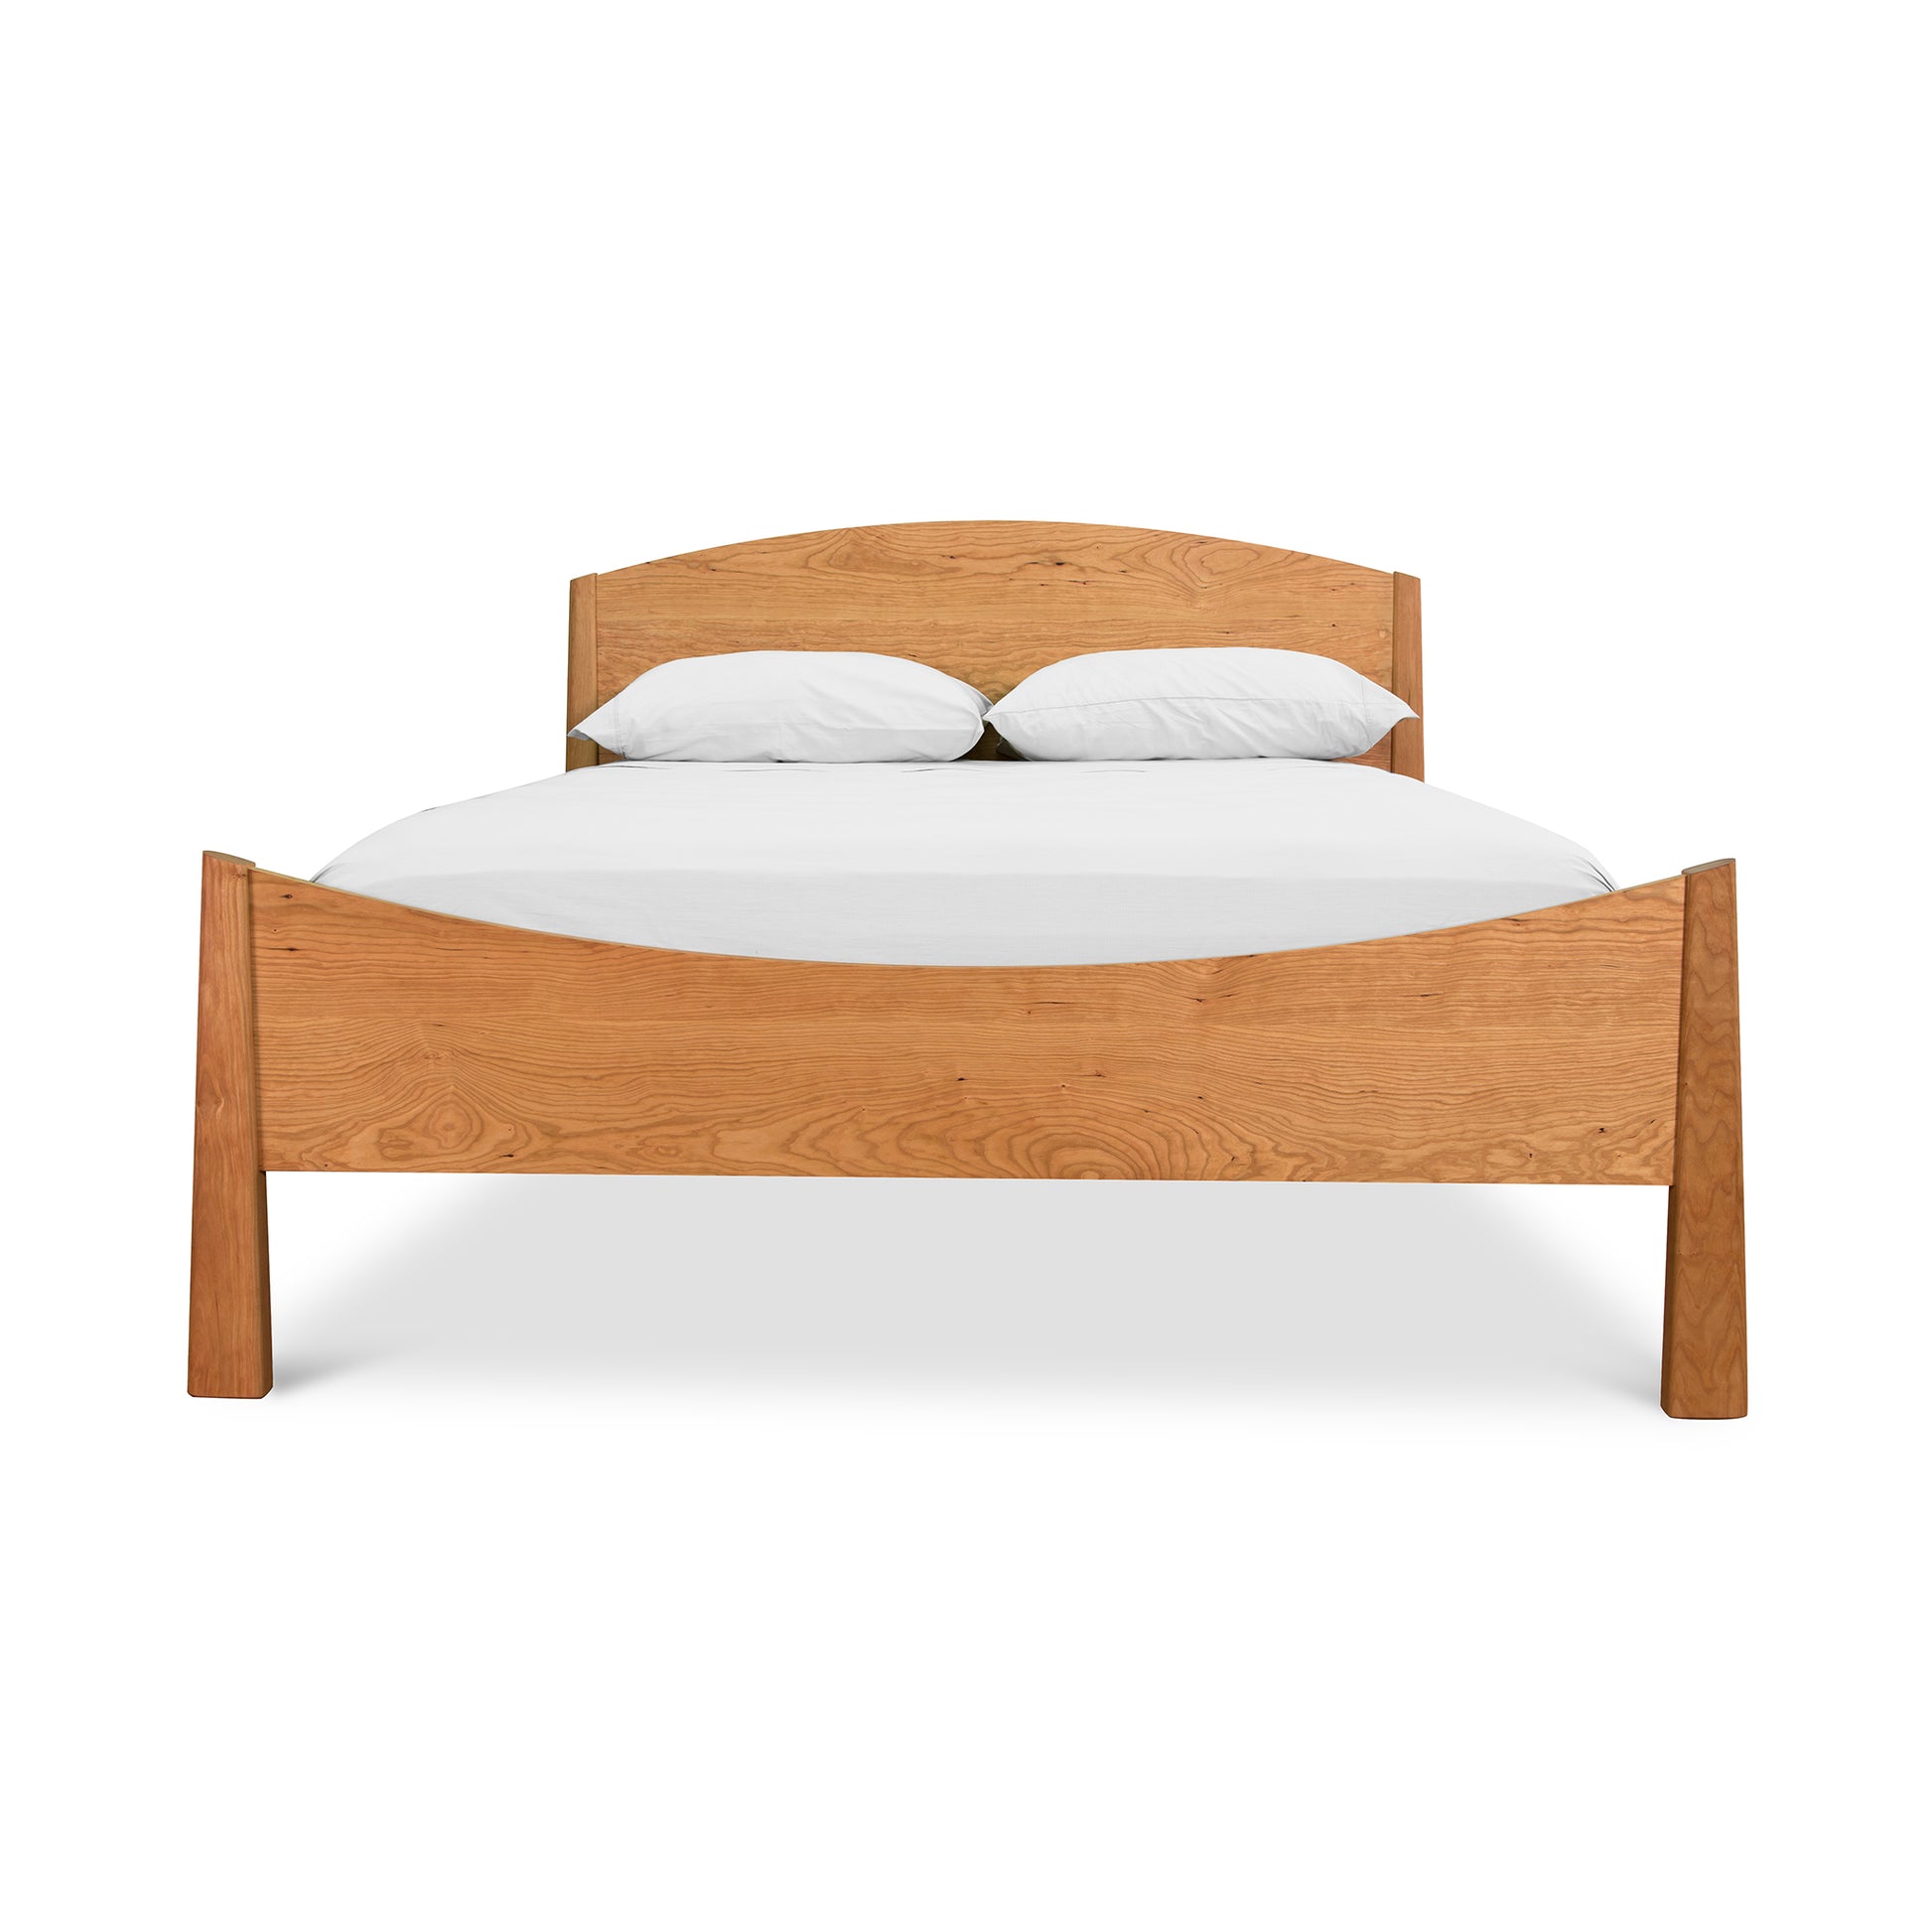 A bed with a wooden headboard and footboard.